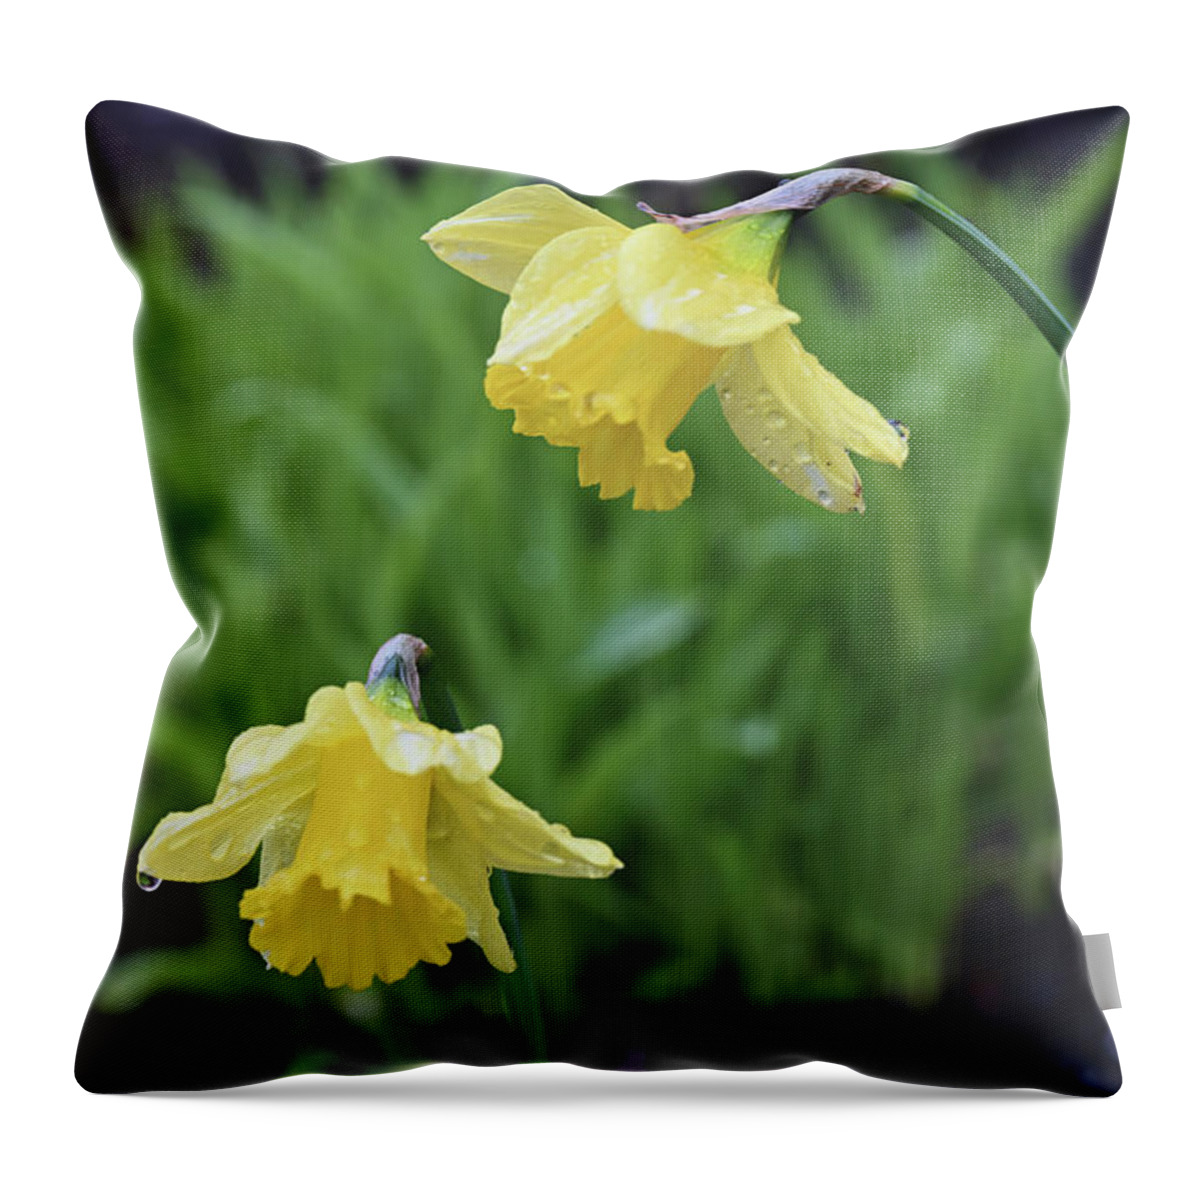 Daffodils Throw Pillow featuring the photograph Daffodils by Jerry Cahill